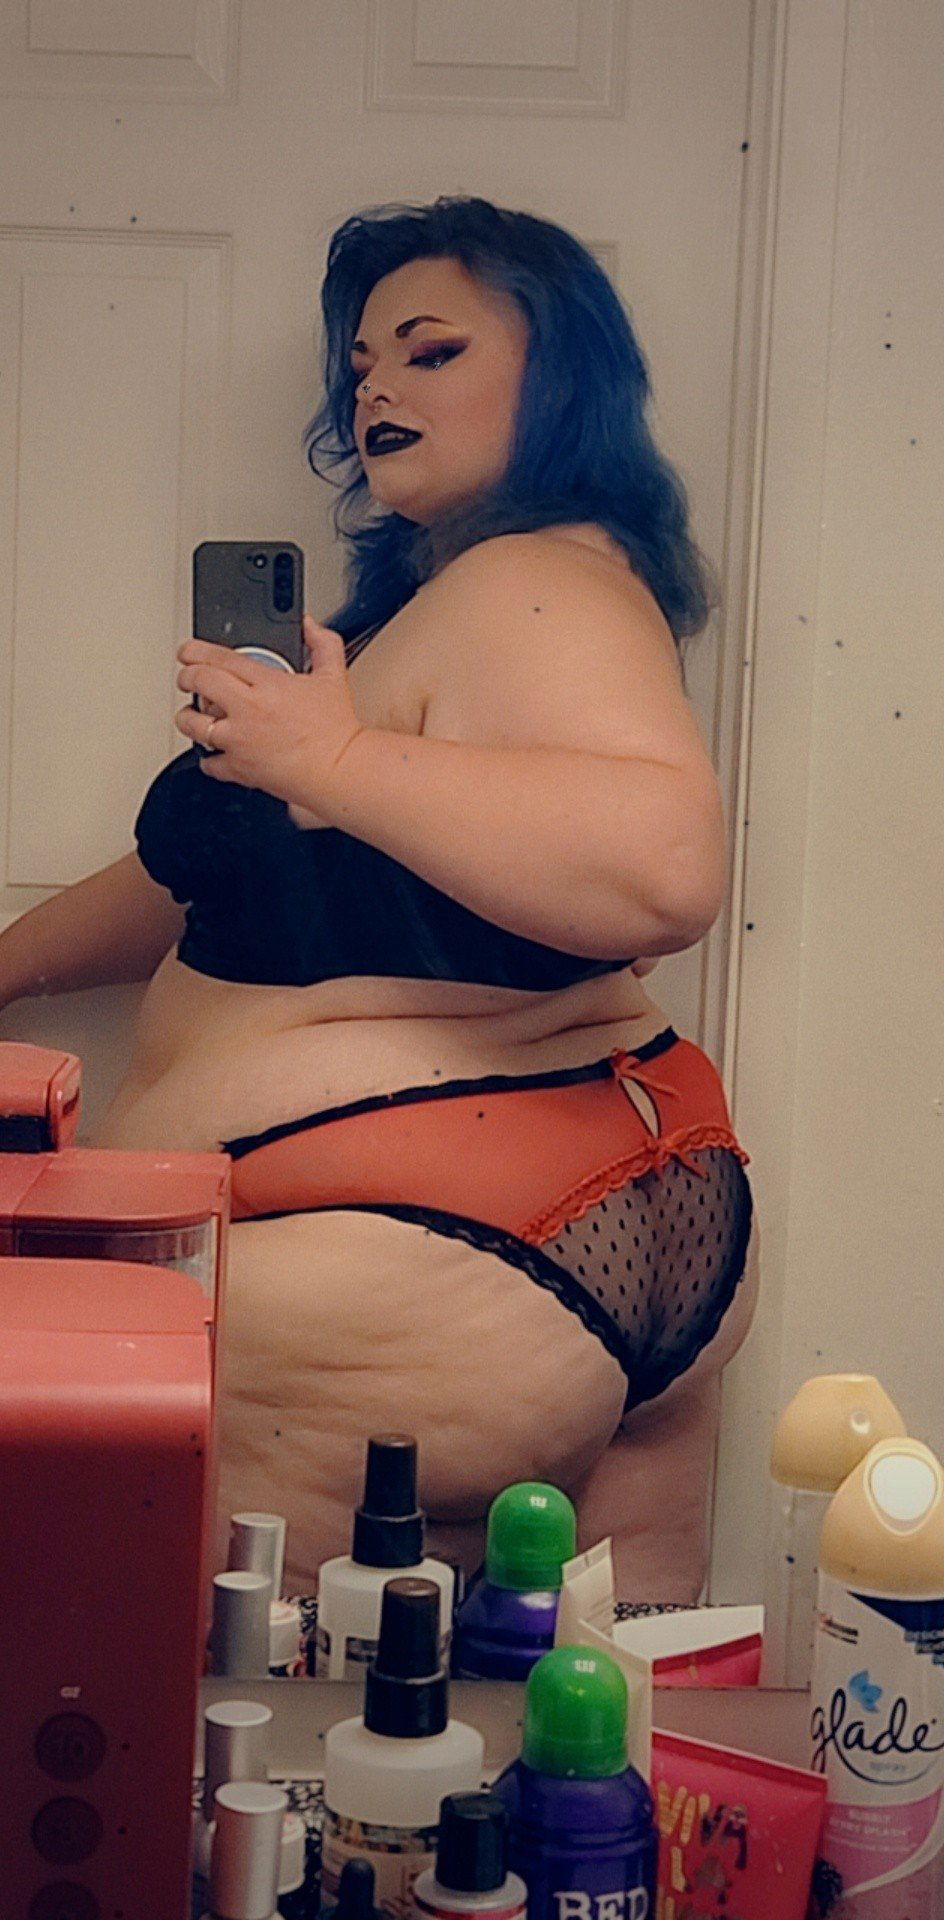 Photo by Chy.mama with the username @Chy.mama,  May 6, 2022 at 2:34 AM. The post is about the topic BBW and Chubby and the text says '#bww #fat #bigtiddygoth #boobs #ass #kitten'